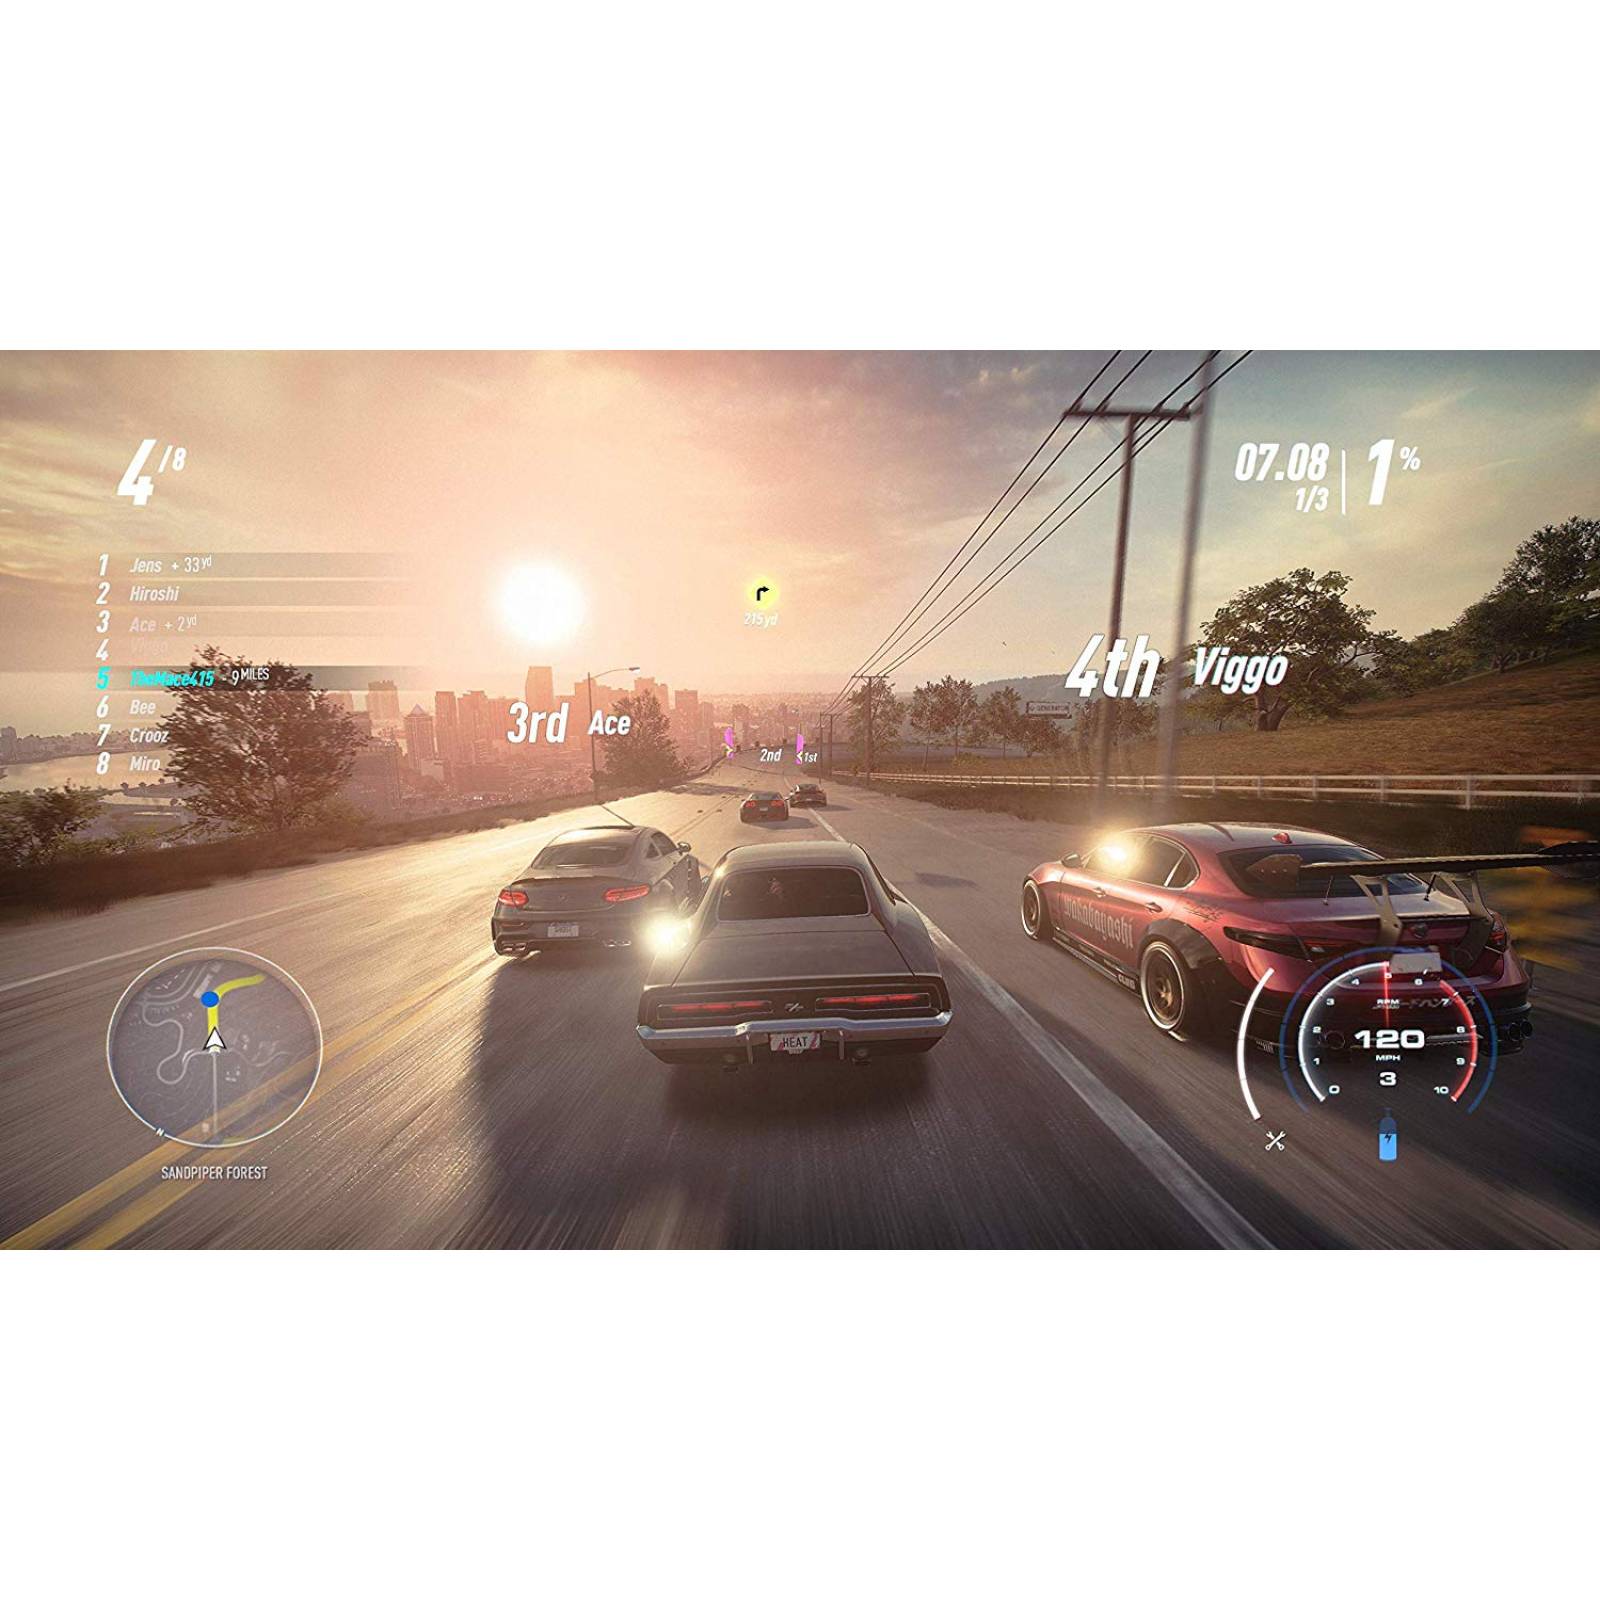 PS4 Need For Speed Heat